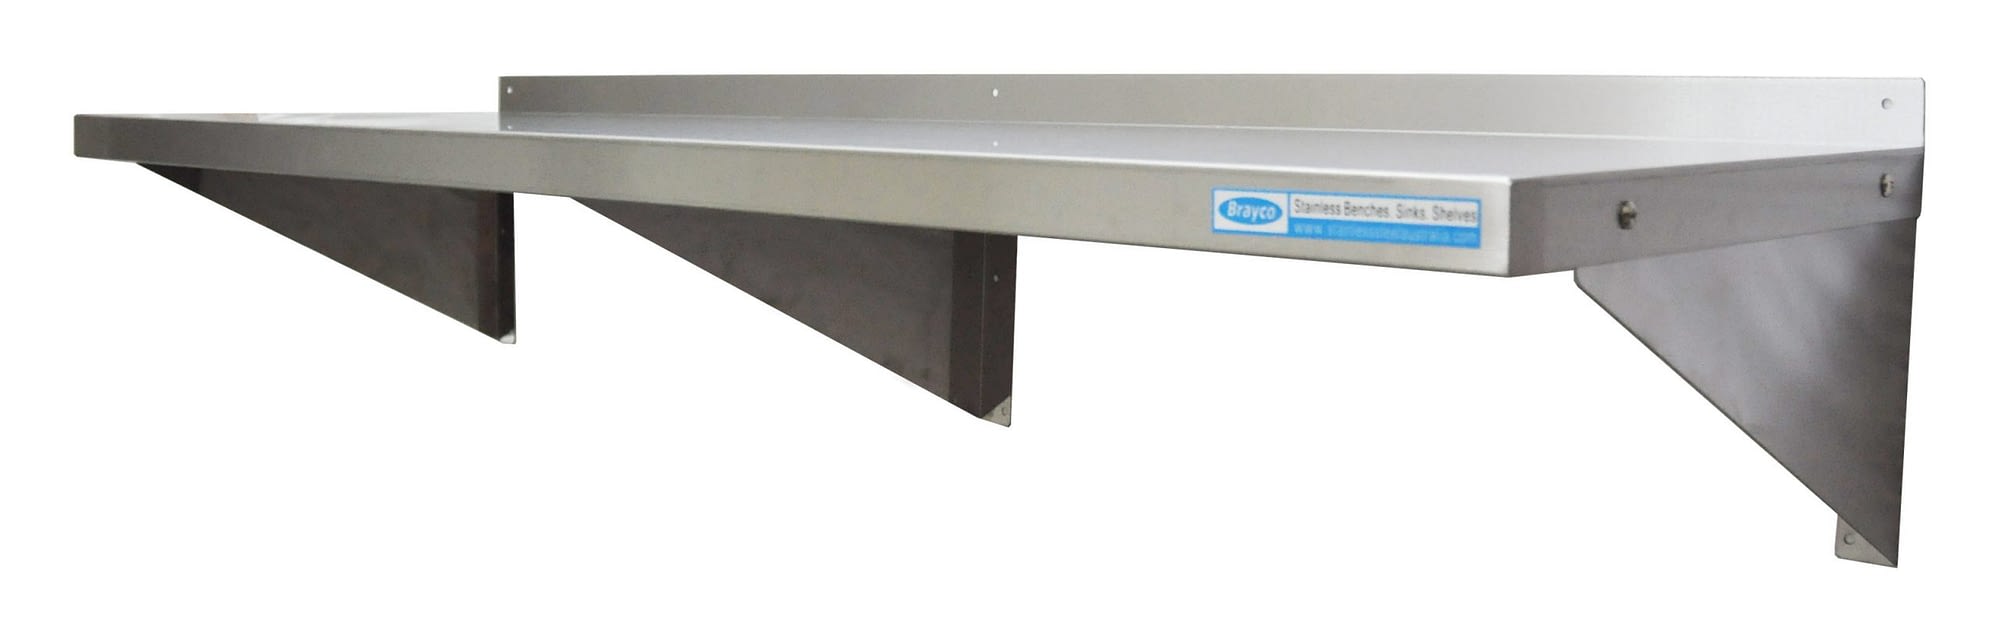 Stainless Steel Solid Wall Shelf, 1500 X 450mm deep